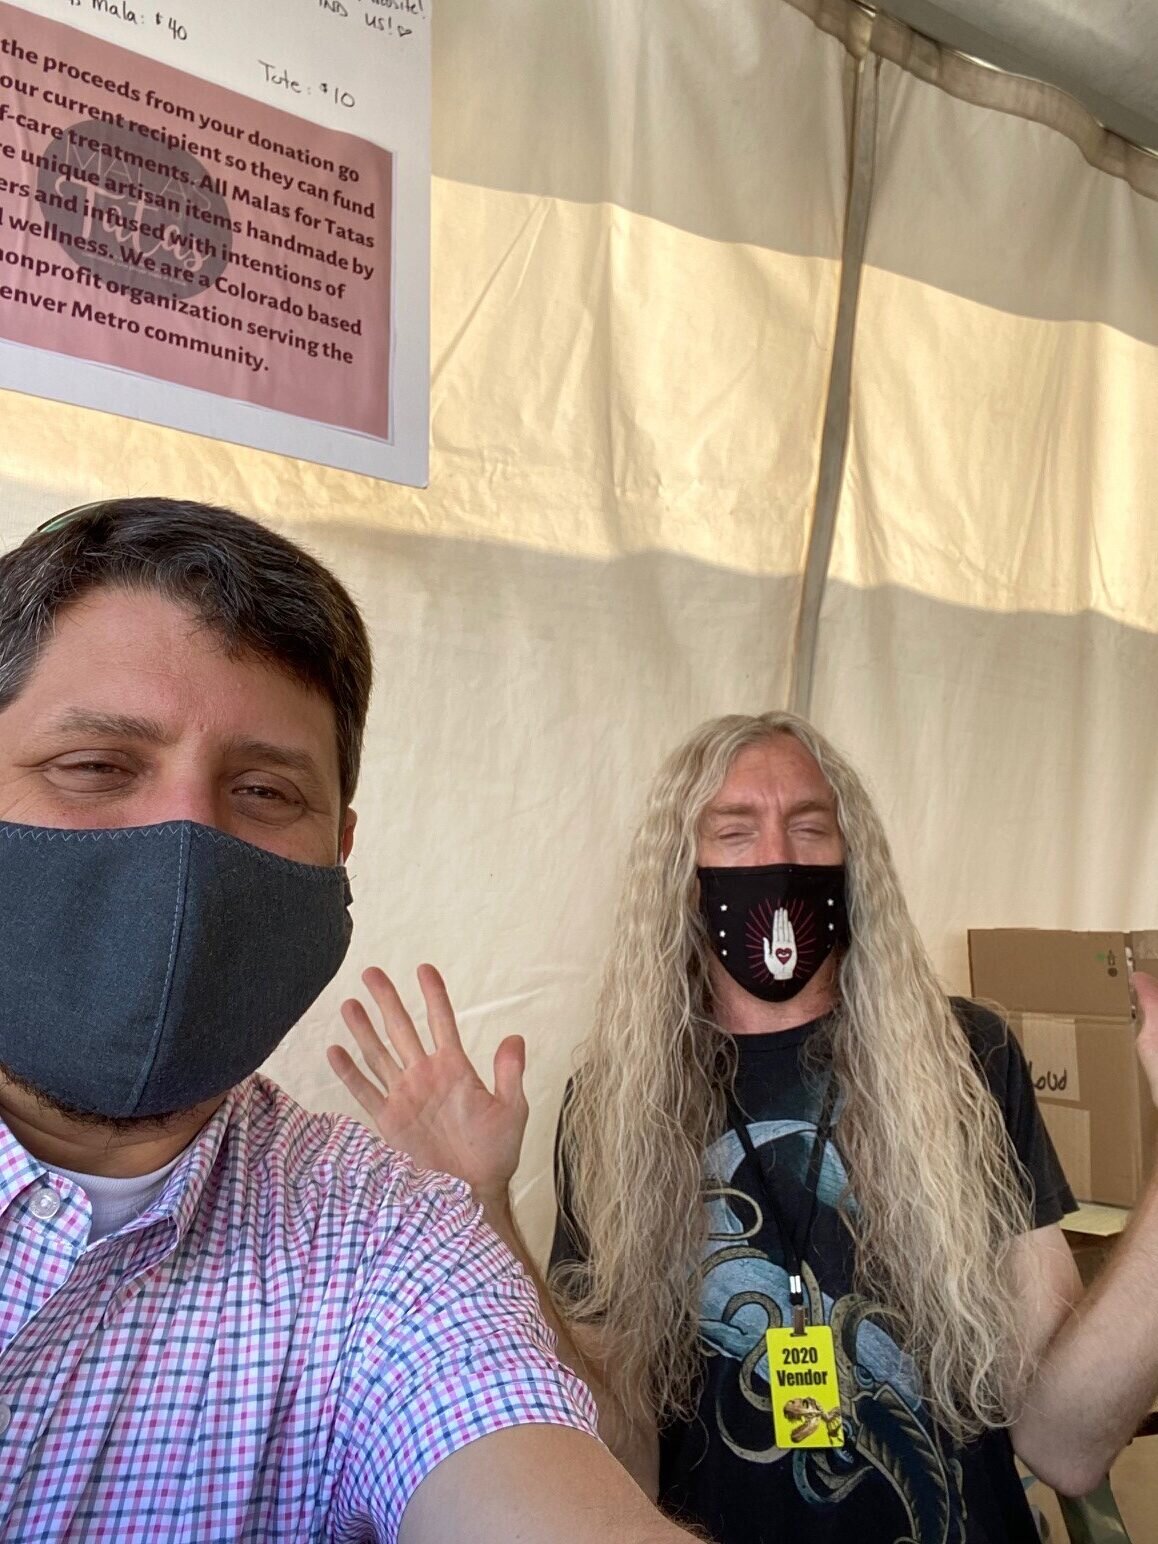 Backstage at Led Zepplin! or maybe it’s Jason New